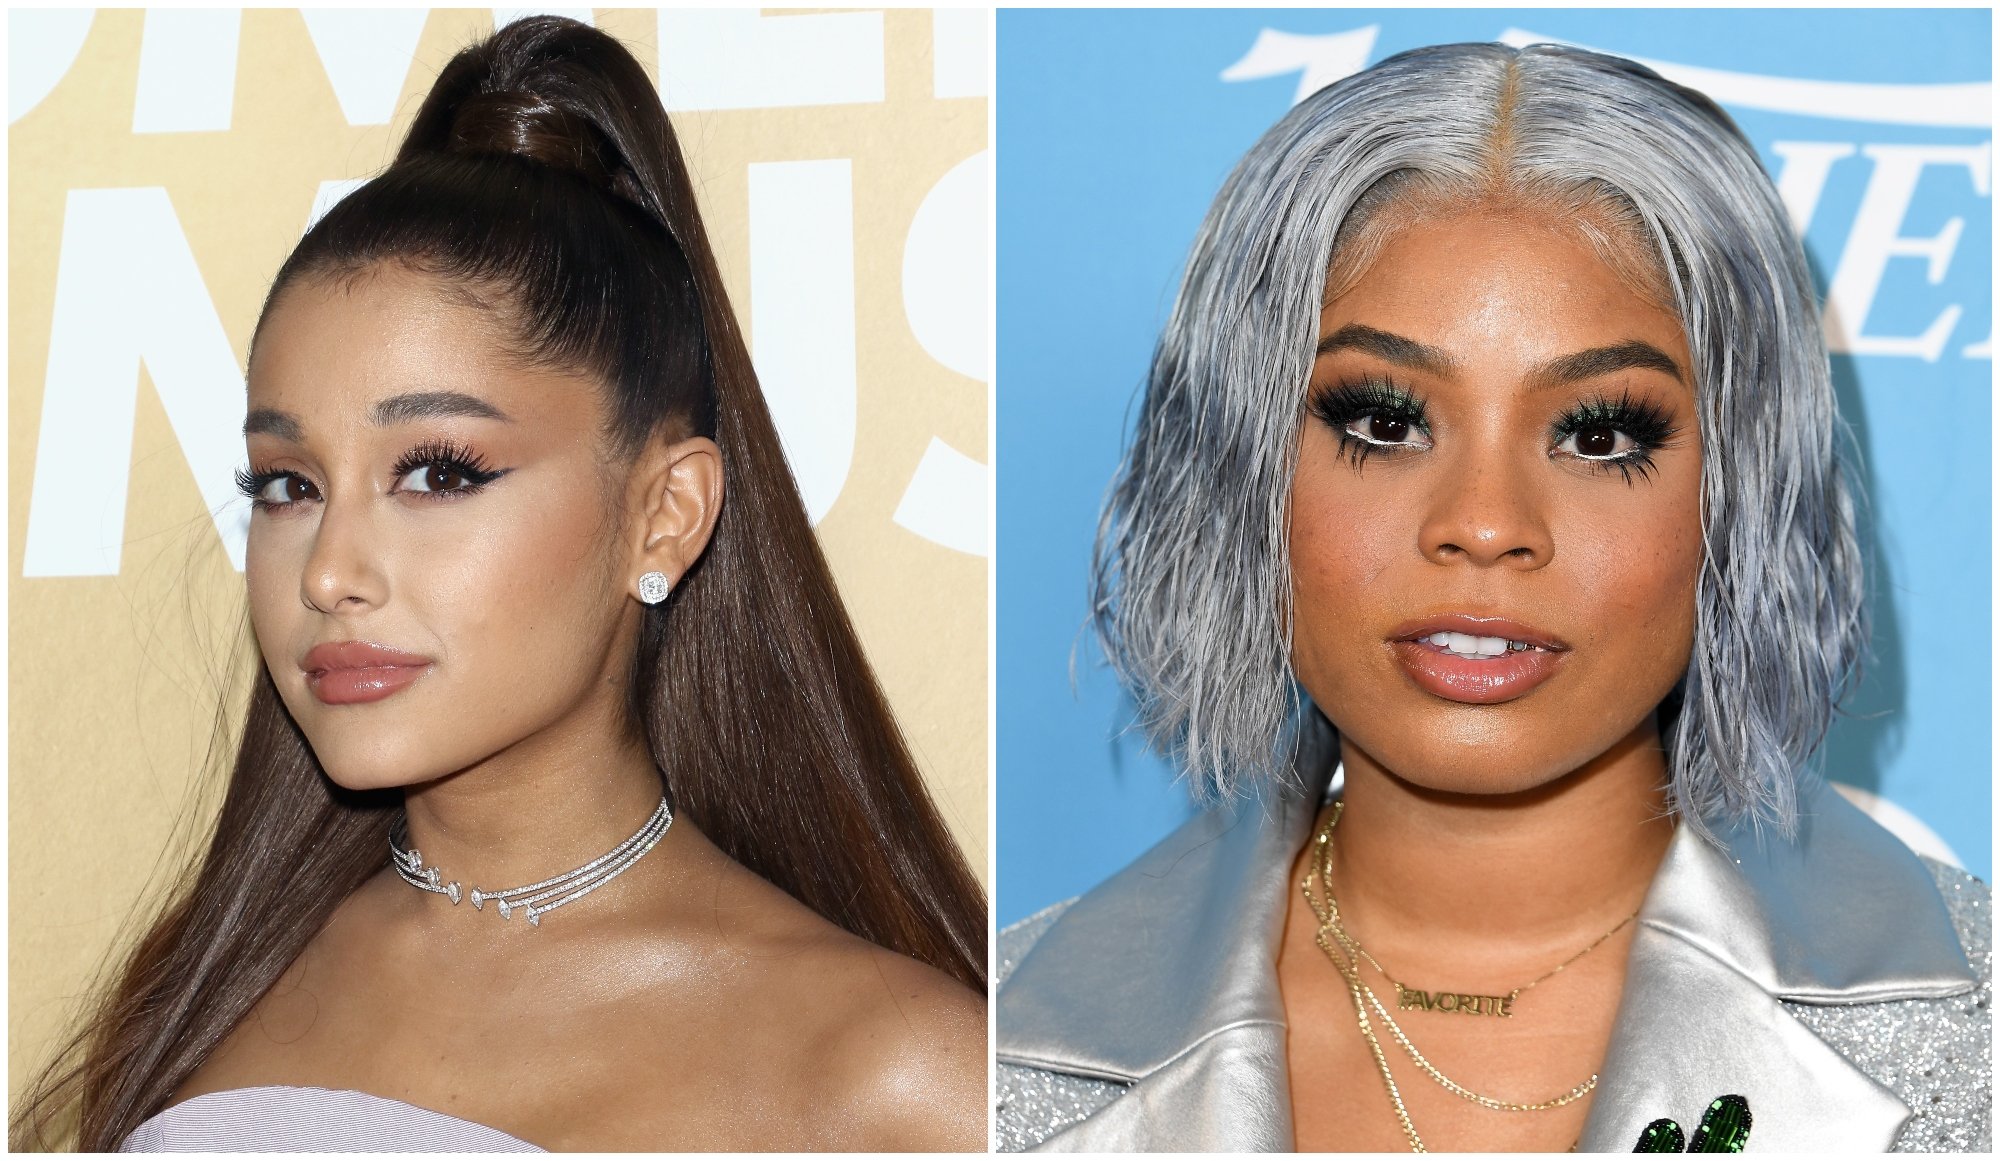 composite image of Ariana Grande and Tayla Parx